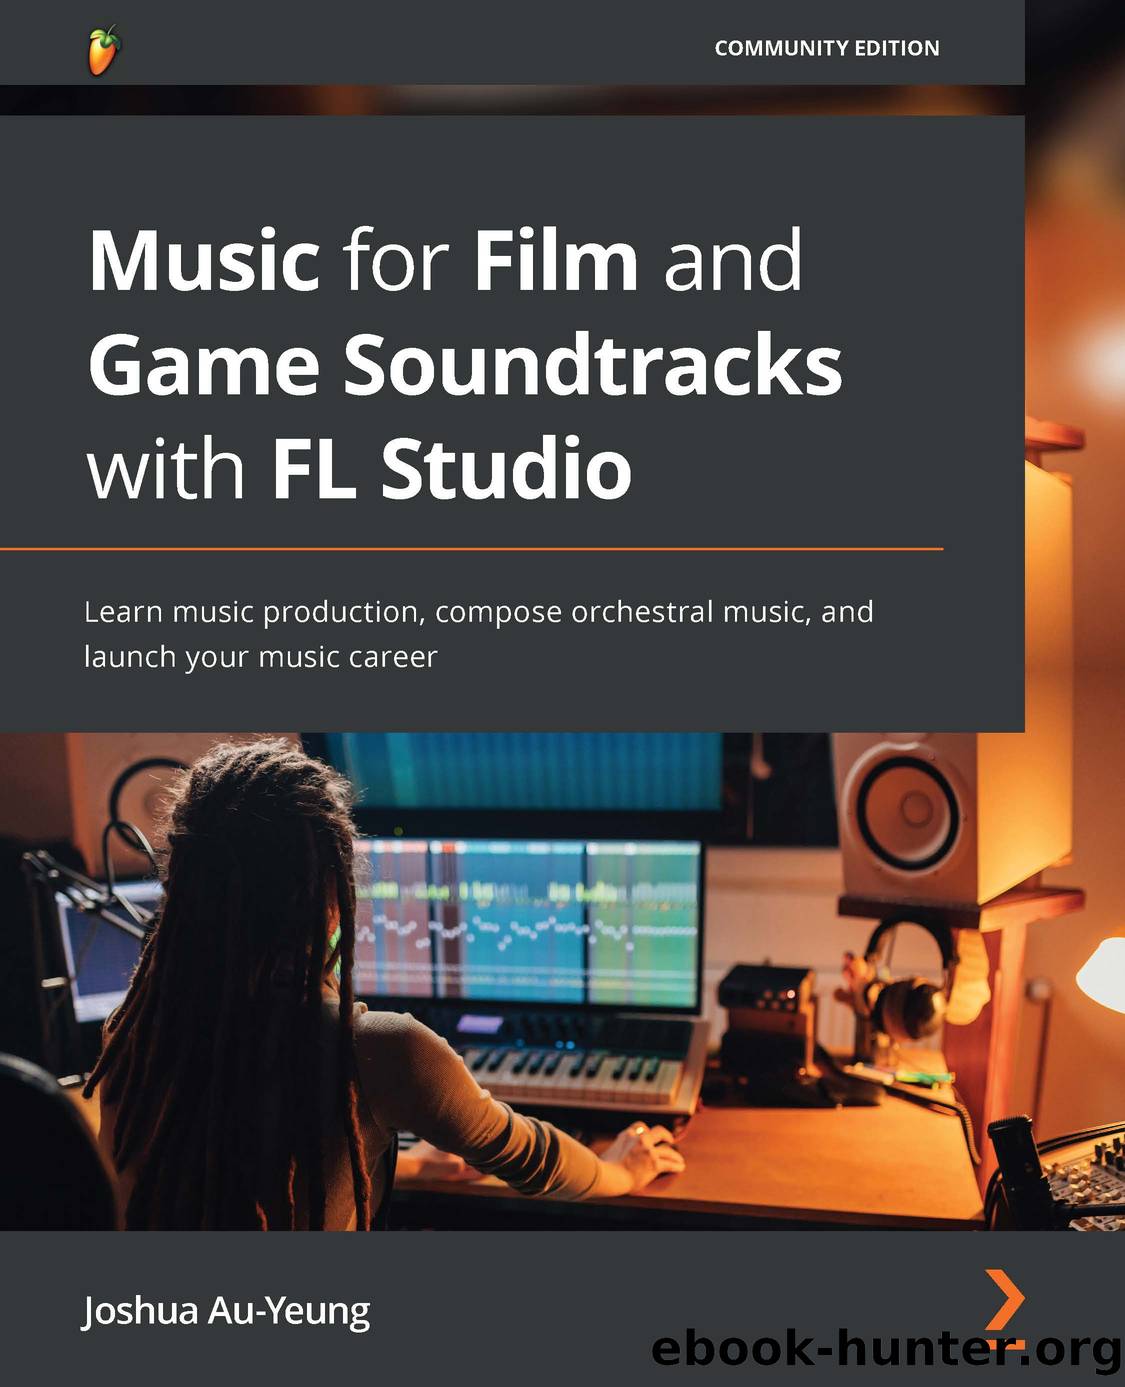 Music for Film and Game Soundtracks with FL Studio by Joshua Au-Yeung